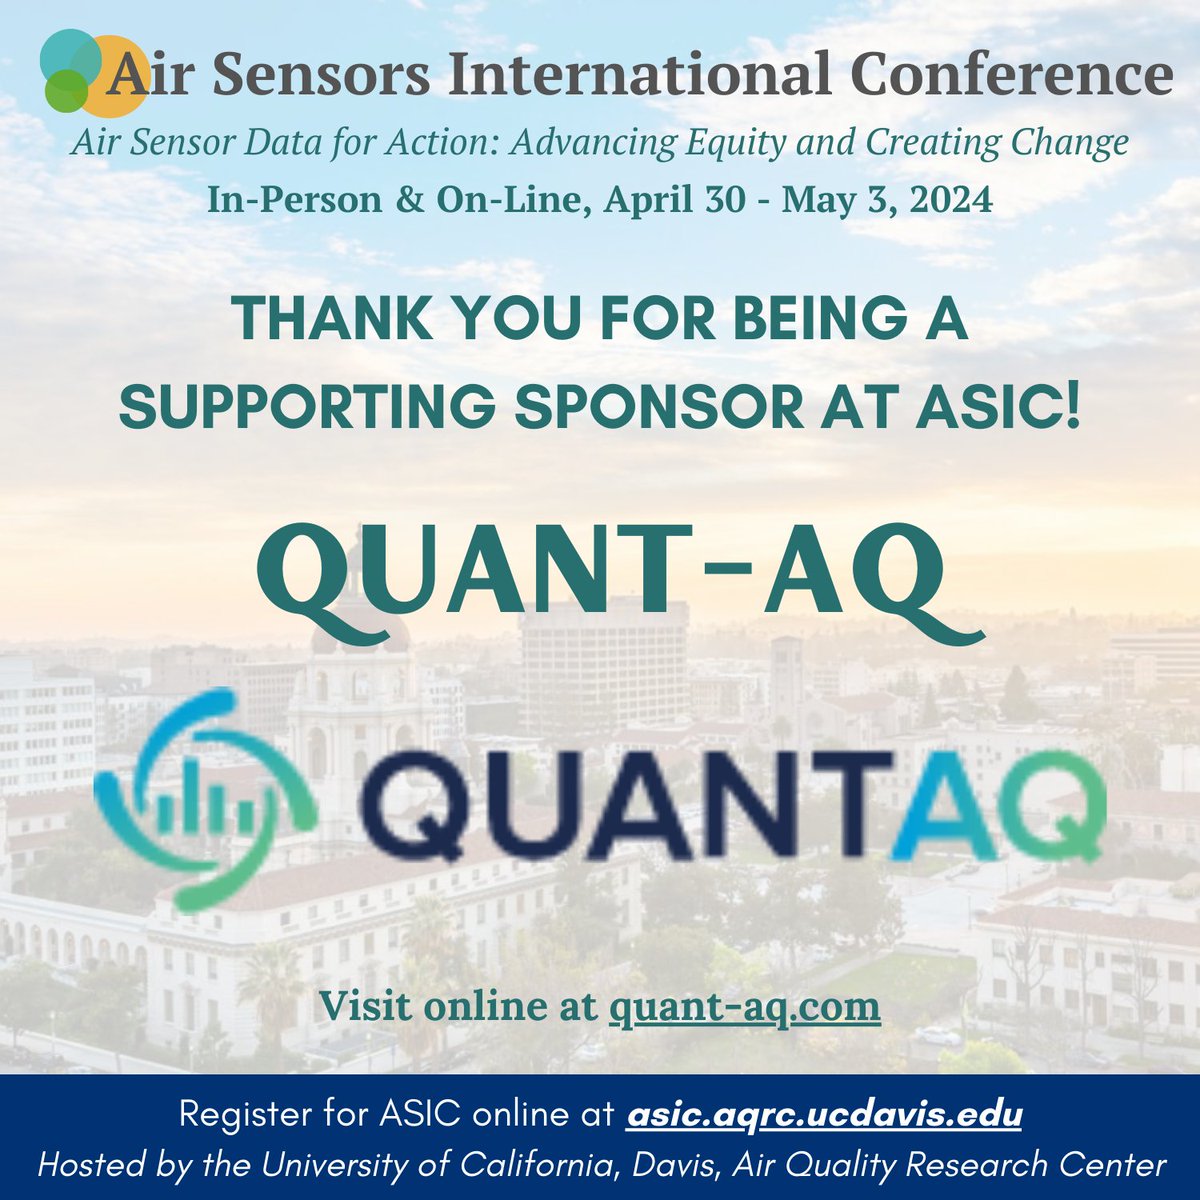 Thank you again to QuantAQ for being a supporting sponsor at ASIC California 2024! Learn more about them at quant-aq.com. #QuantAQ #ASIC2024 #airquality #airsensors #lowcostsensors #airpollution #lowcostsensors #communityscience